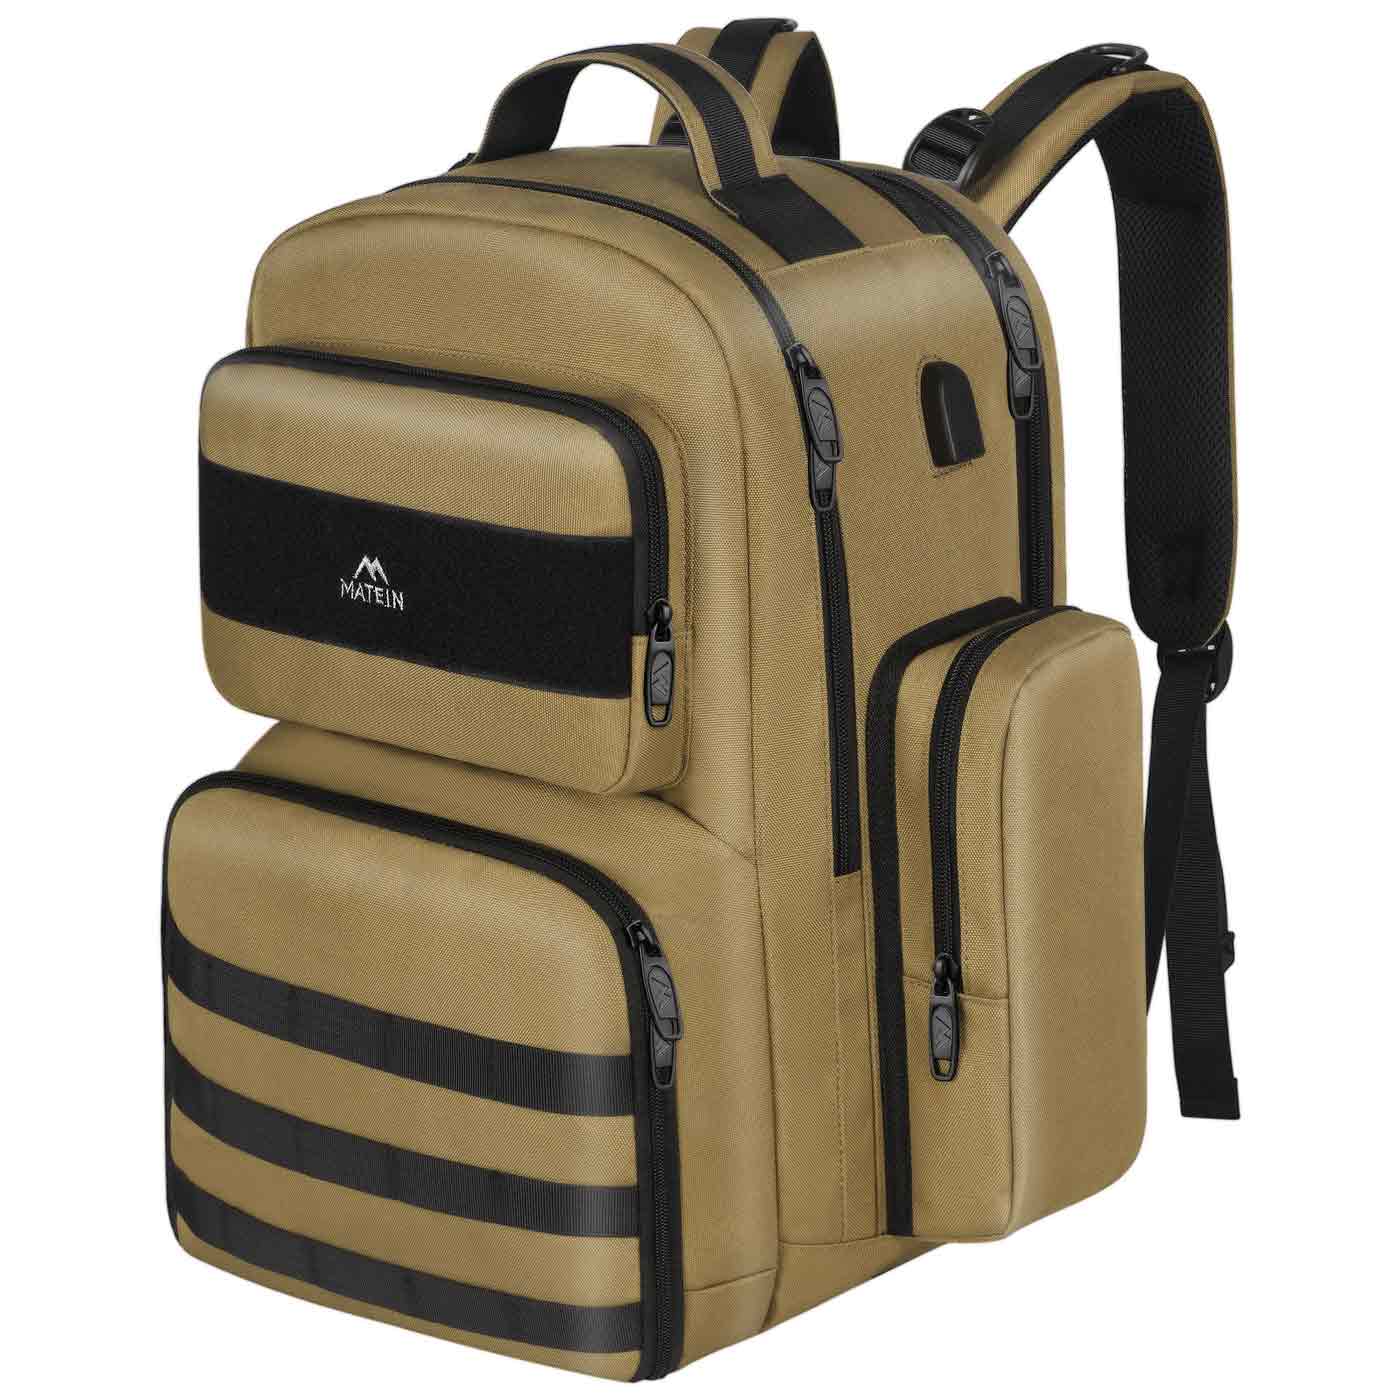 Backpack My first bag - Canvas khaki